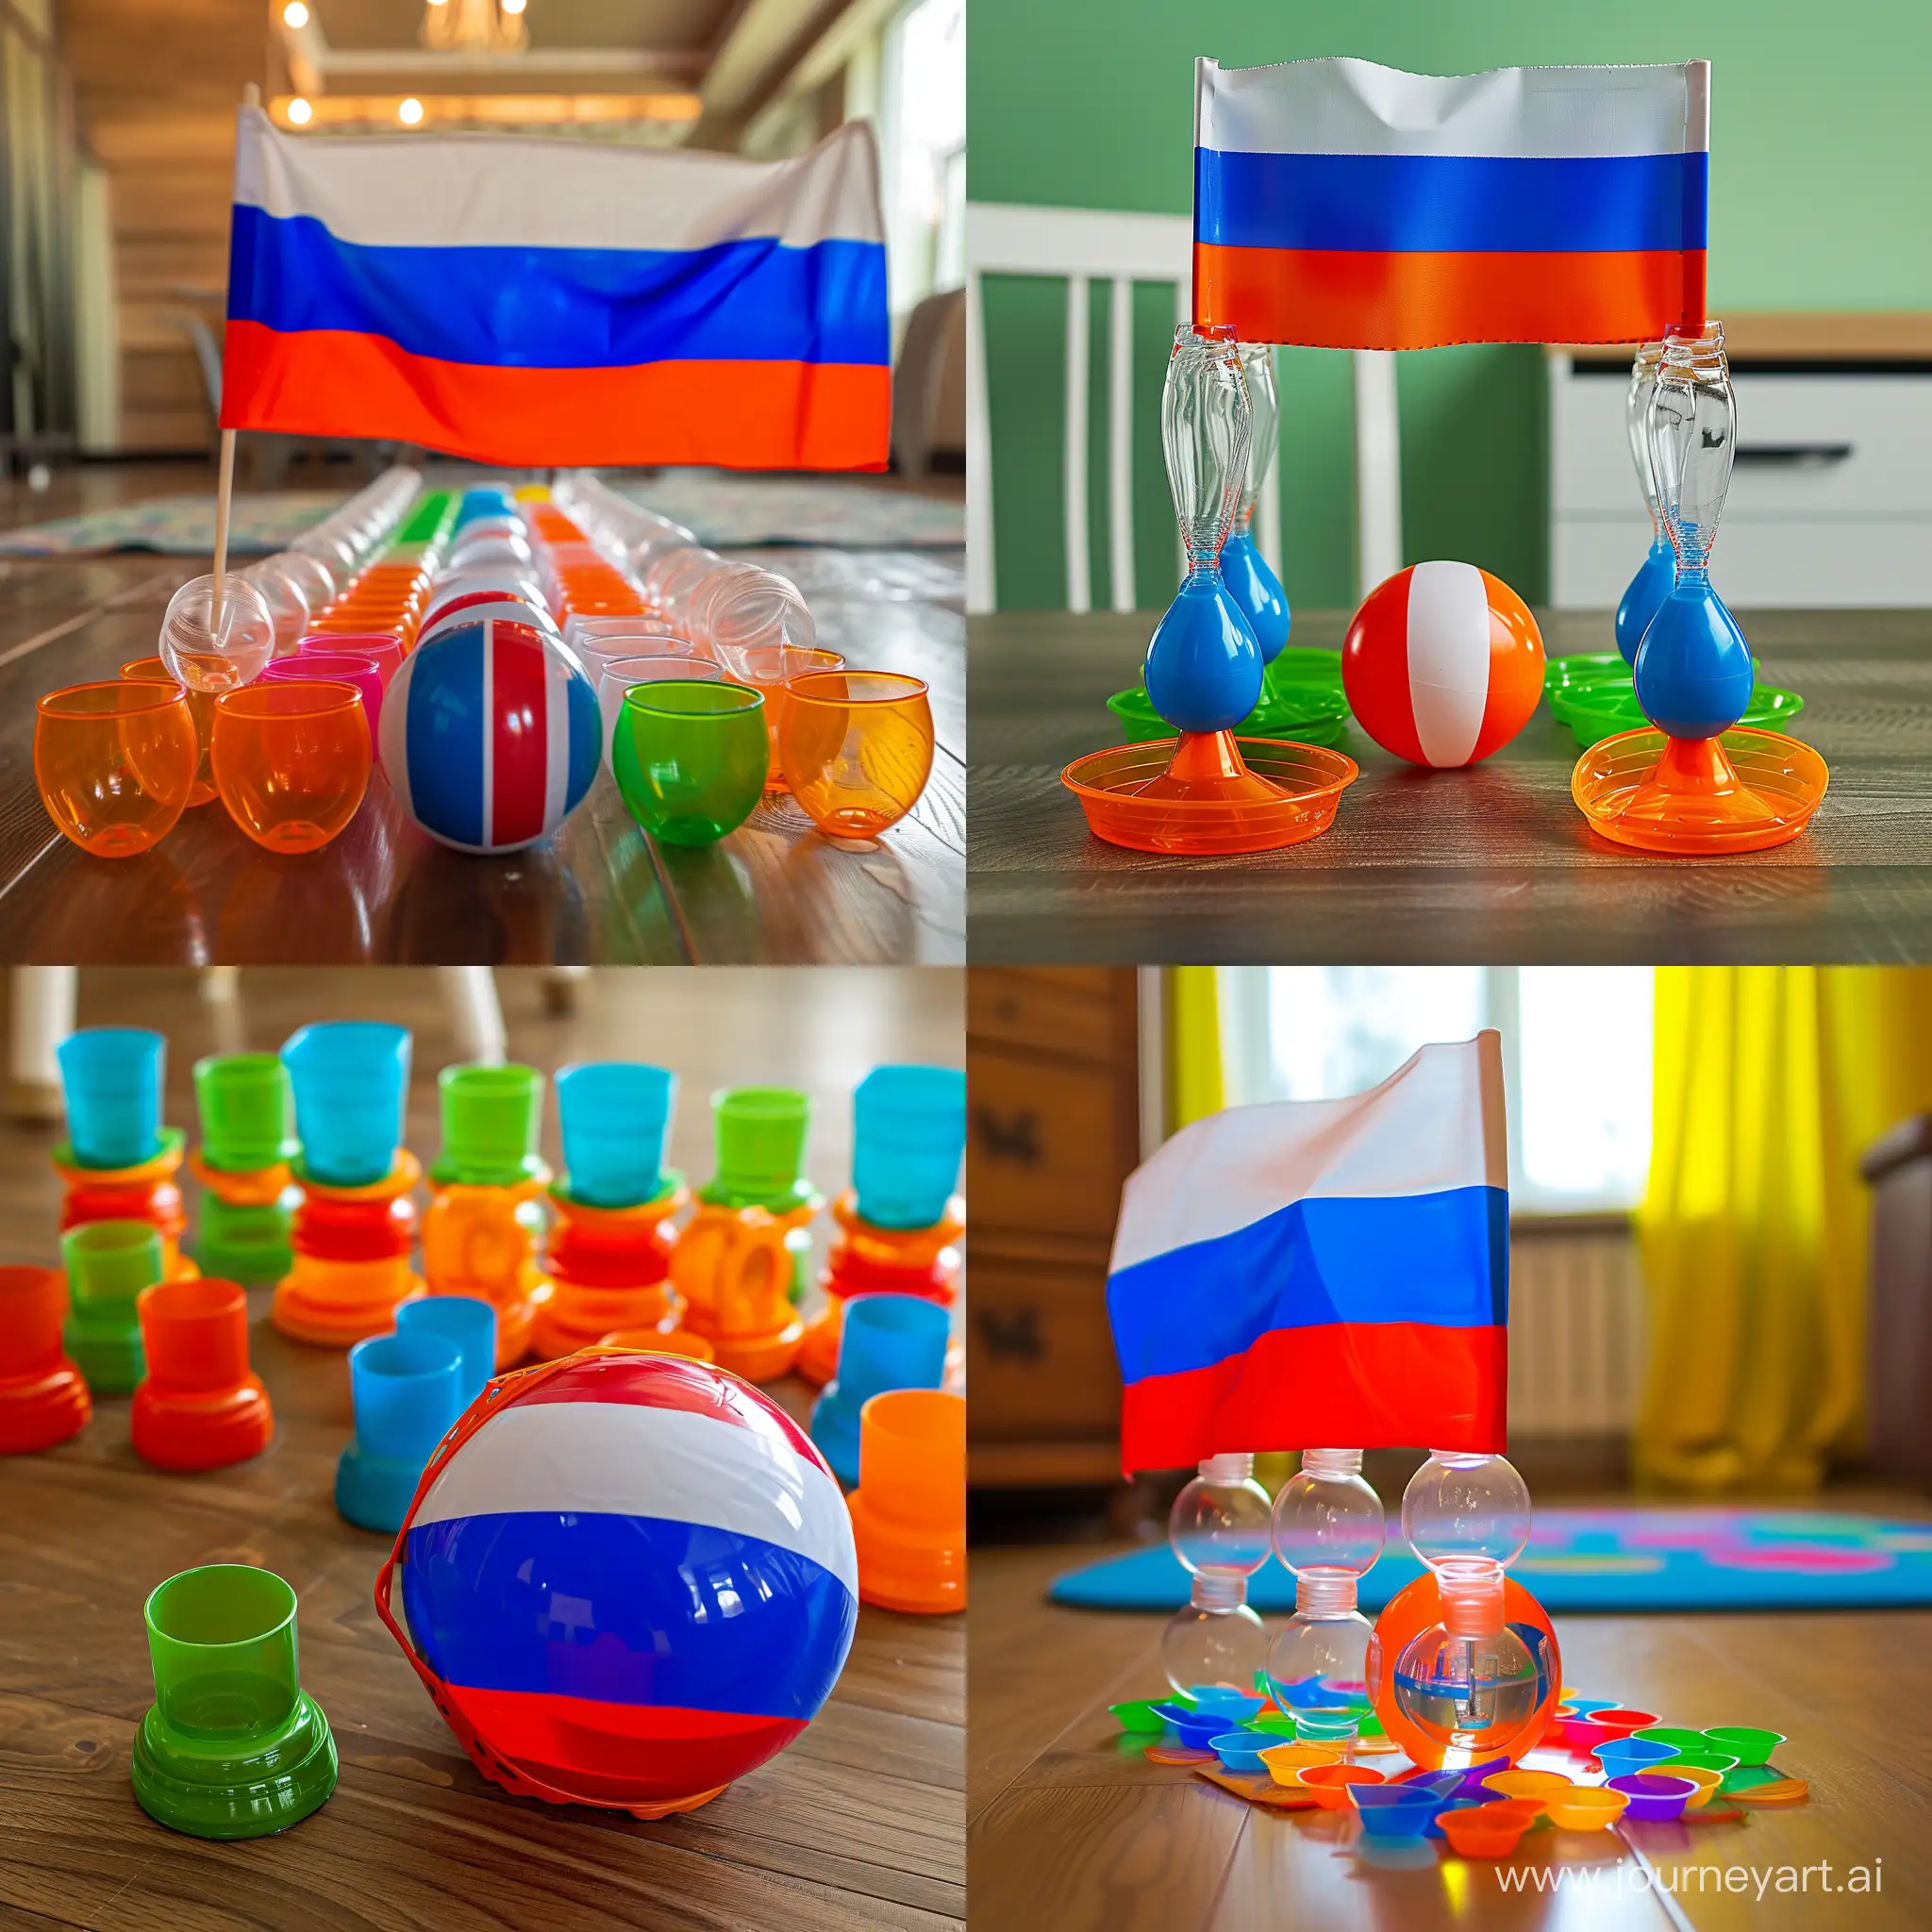 Shell game with upisidedown plastic cups and a russian-flag as a ball